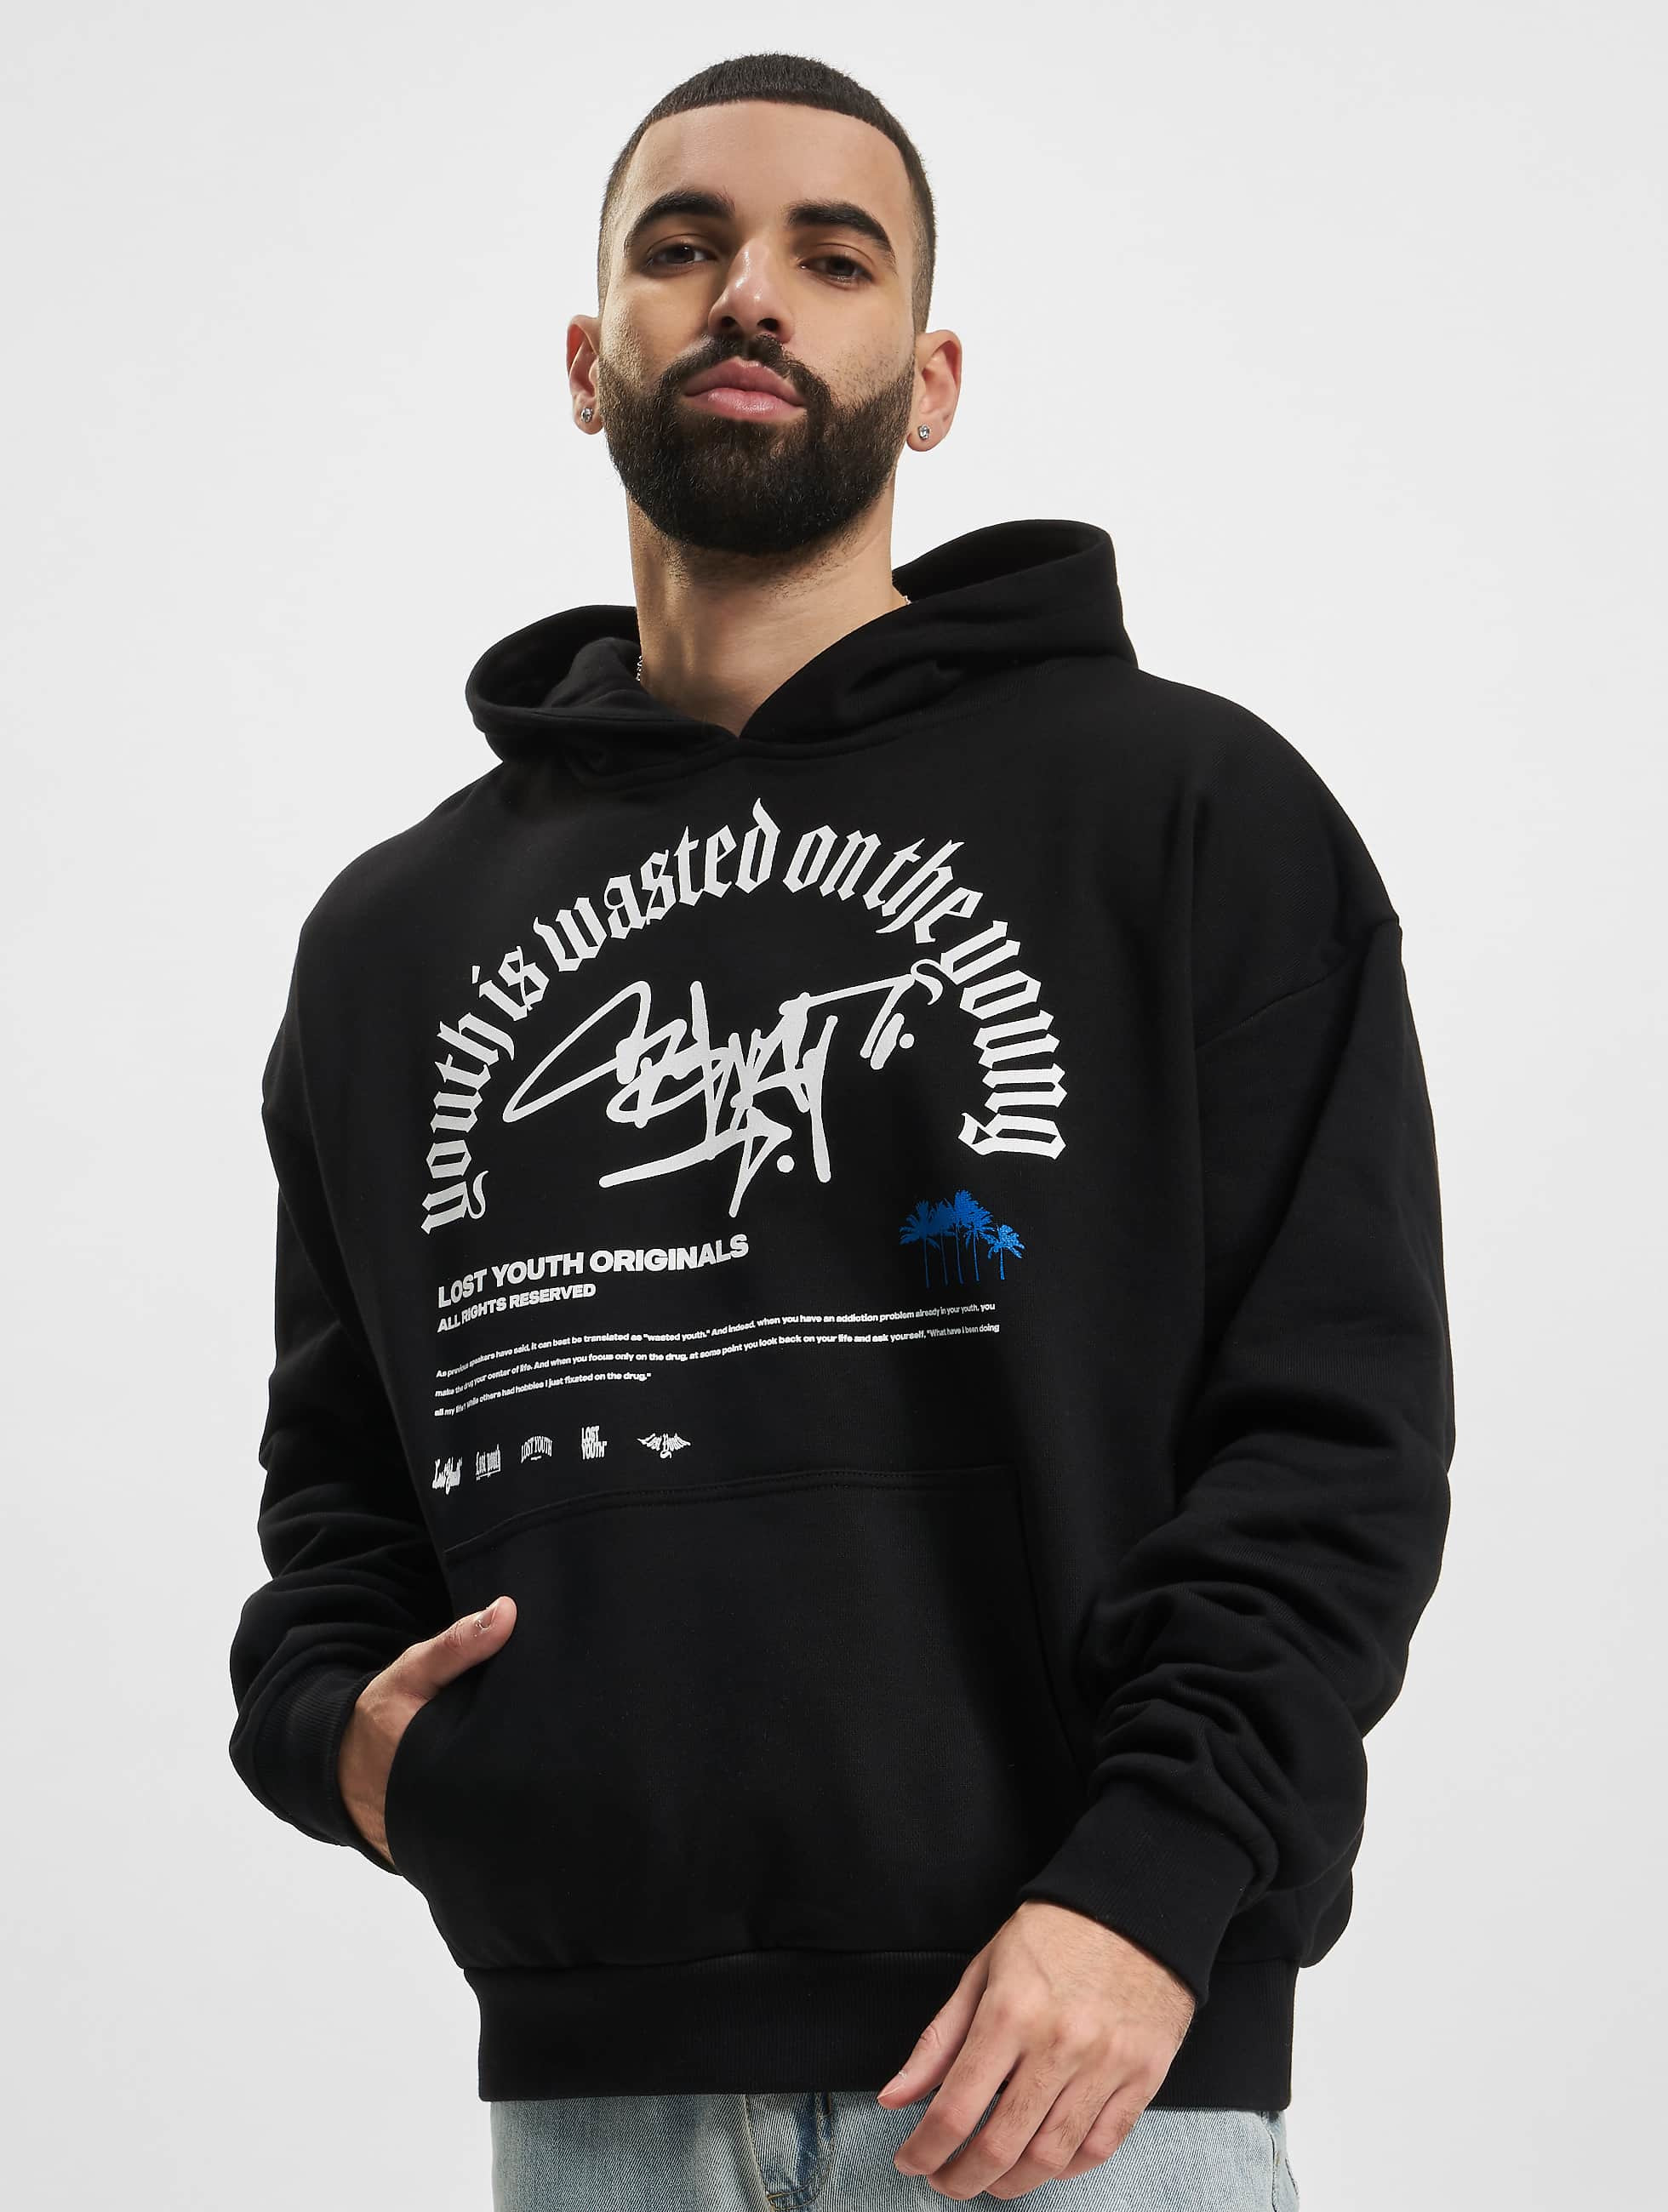 Lost Youth Overwear / Hoodie 